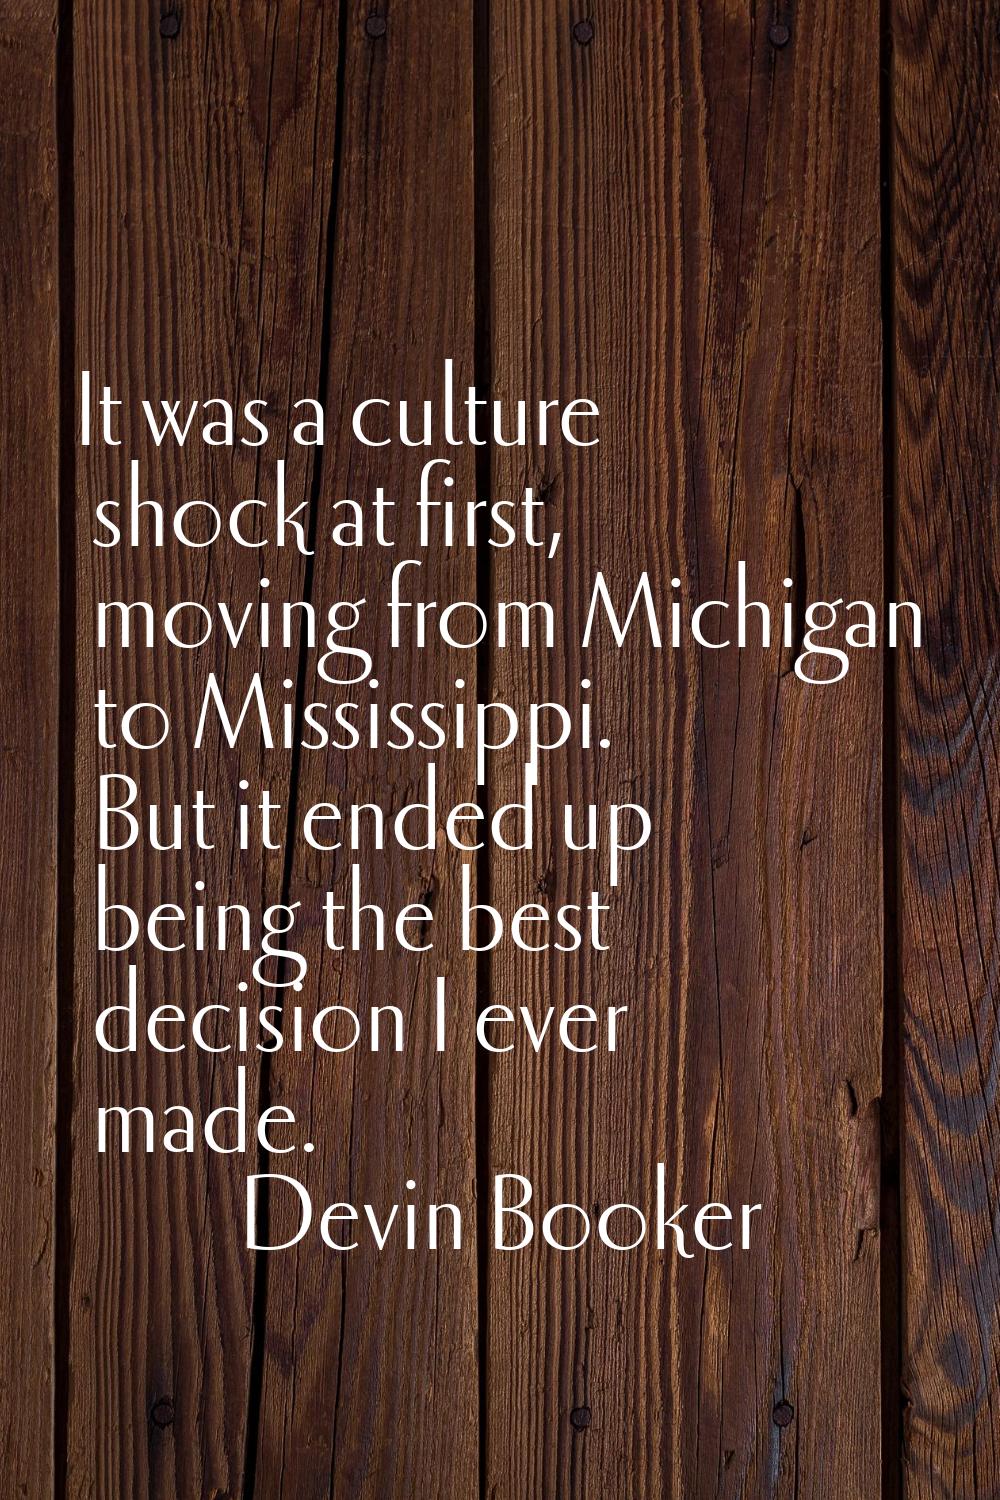 It was a culture shock at first, moving from Michigan to Mississippi. But it ended up being the bes